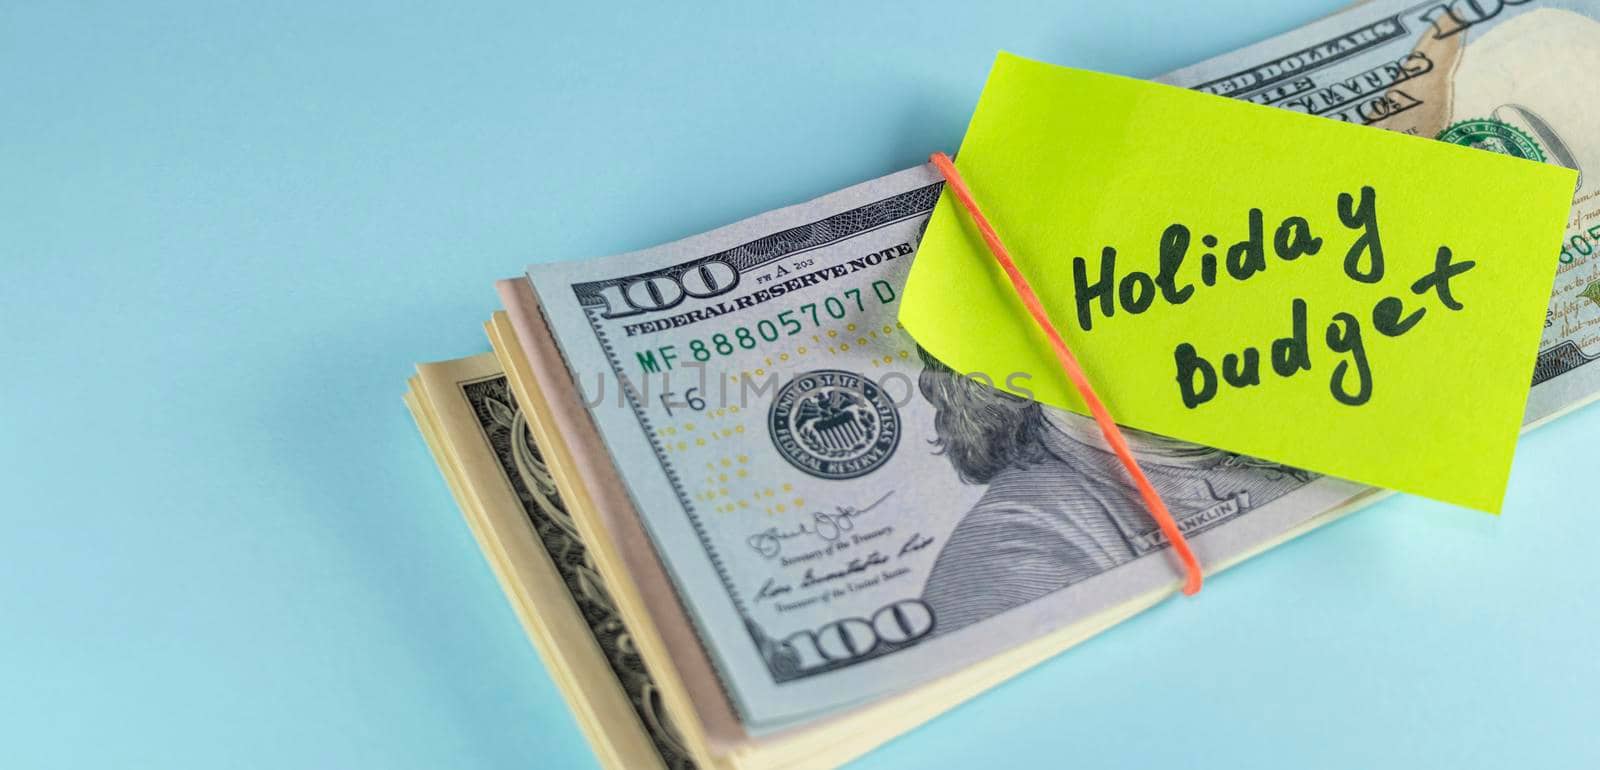 banner with text written note Holiday budget, dollars cash money in rubber band with note, on background - concept of financial planning of set budget for Christmas or holiday